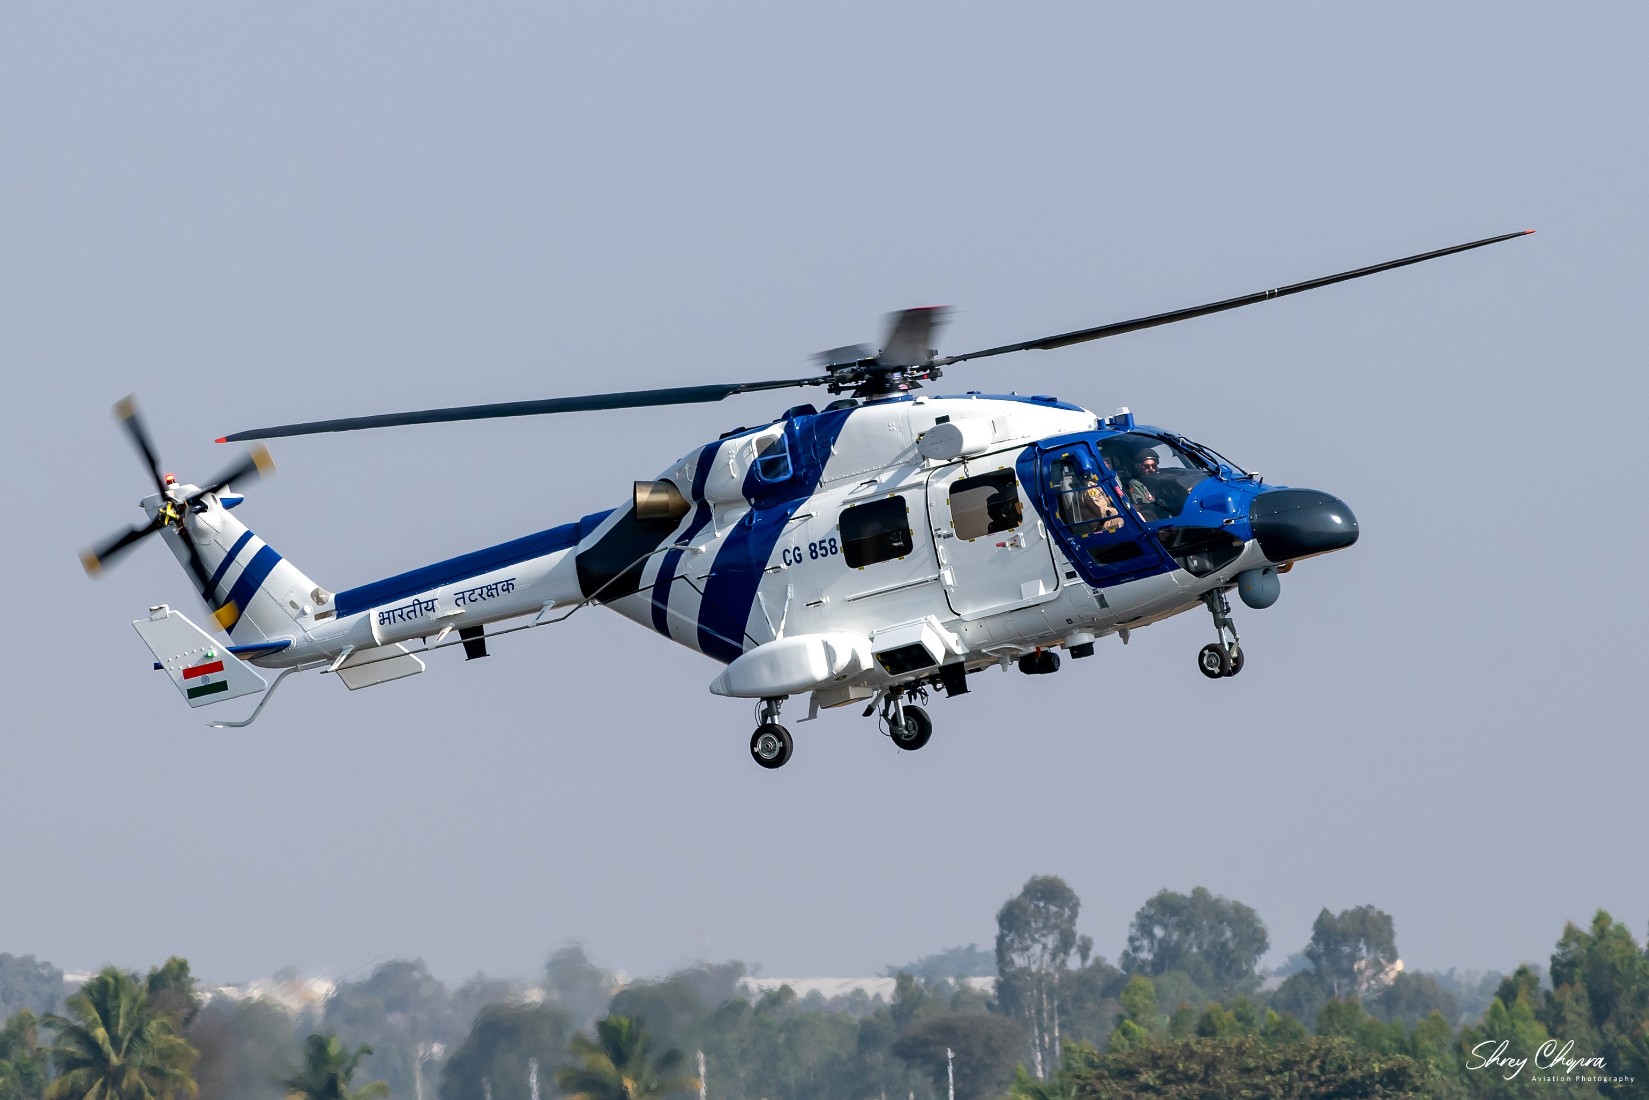 Two Injured In Coast Guard Helicopter Crash Near Cochin Airport